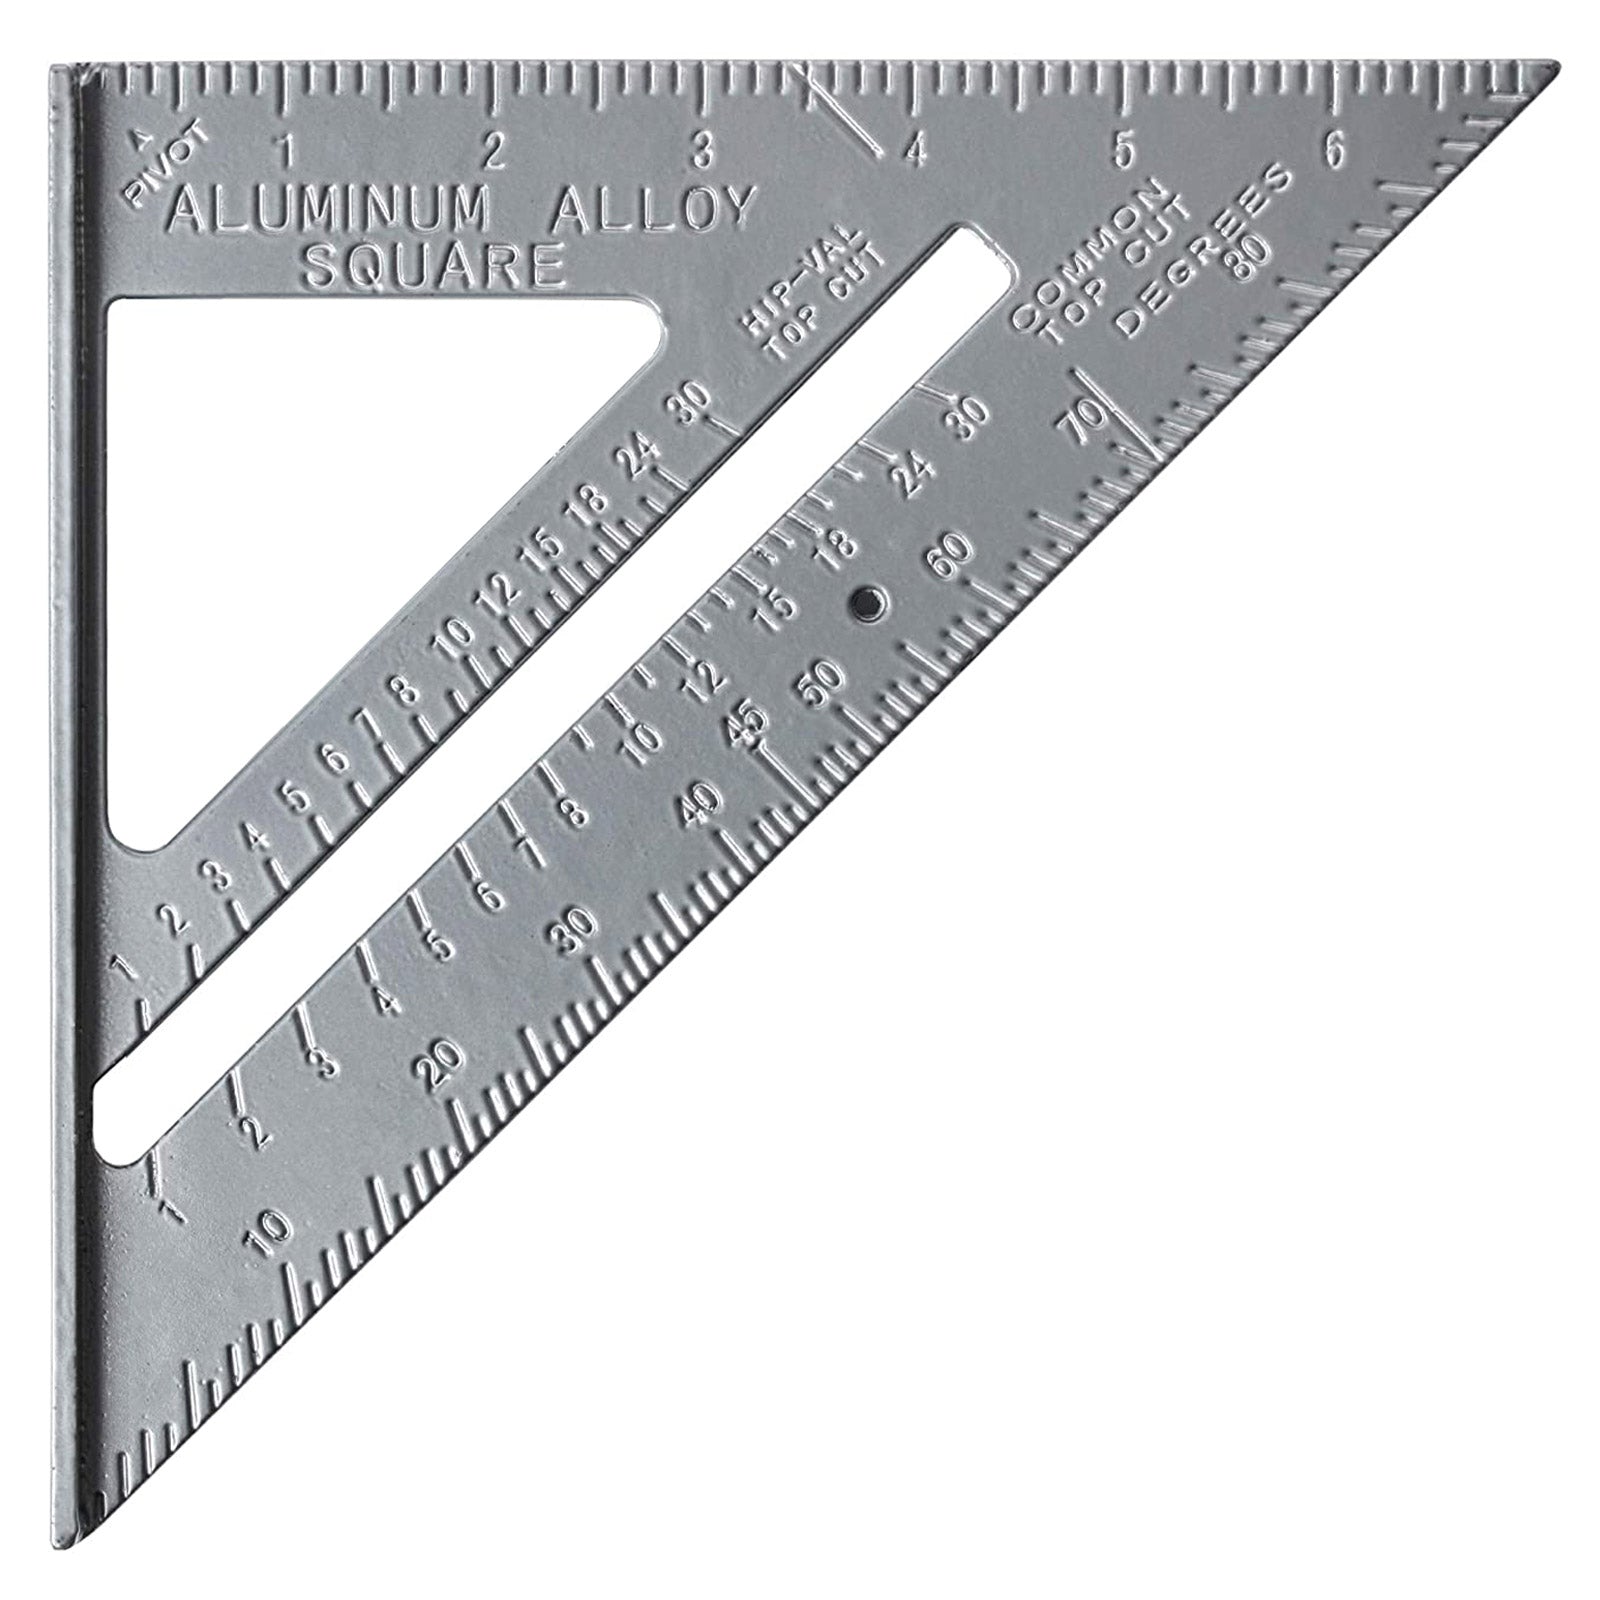 G-Force Aluminum Alloy Rafter Square 7"